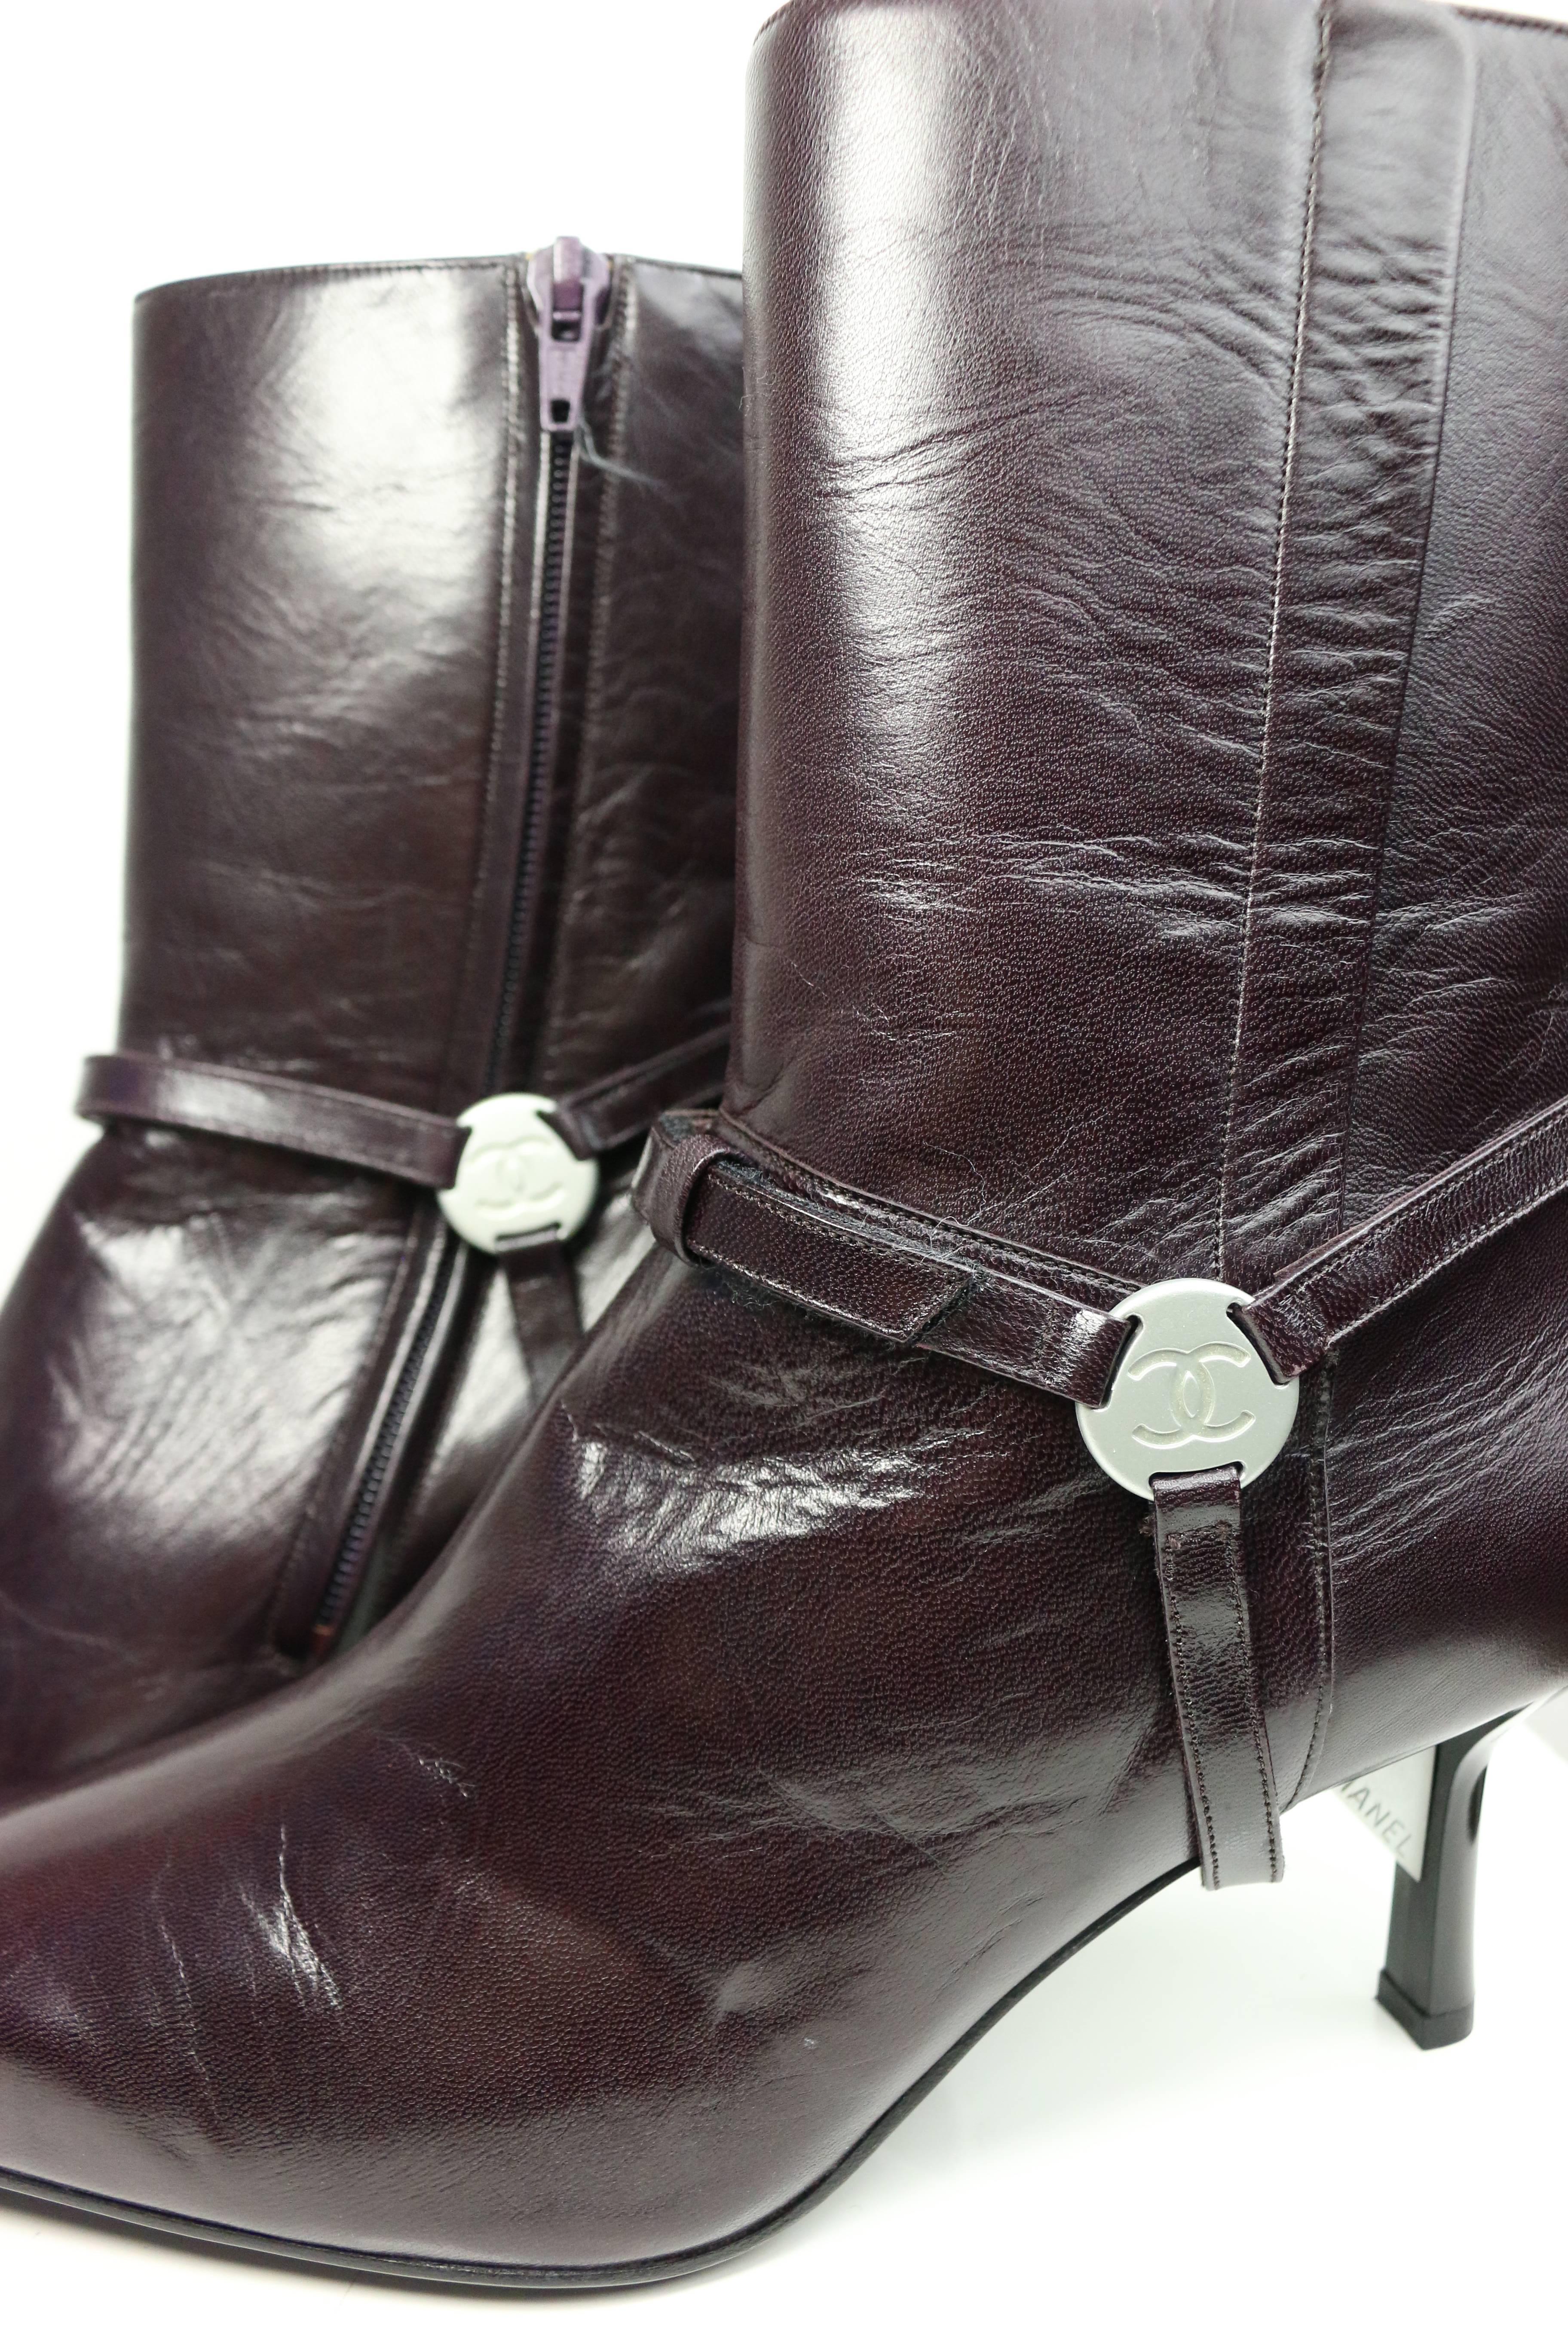 Chanel Burgundy Leather Ankle Boots In Excellent Condition For Sale In Sheung Wan, HK